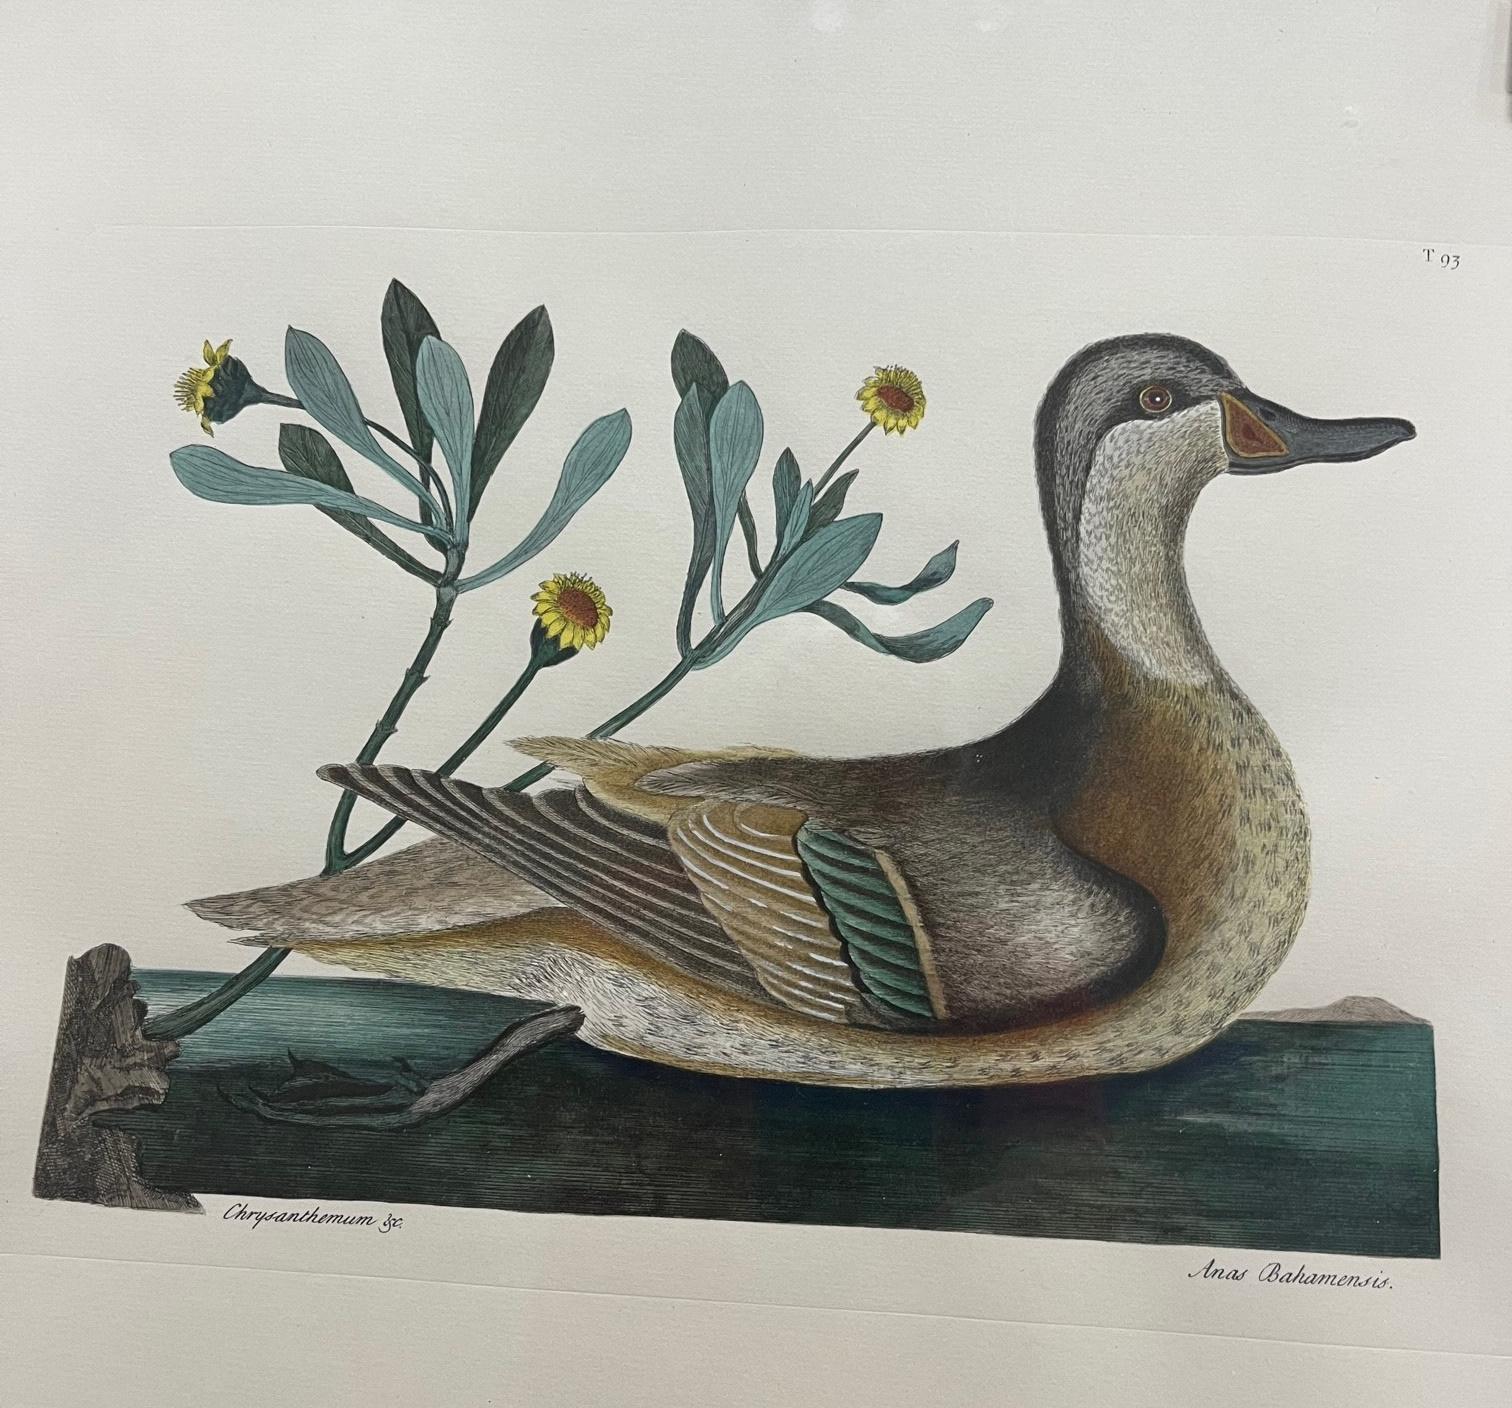 Etching Mark Catesby, Anas Bahamensis (The Ilathera Duck) Chrysanthemum &c T93.

Wonderful print by the “Founder of American Ornithology”, Mark Catesby, from his 18th century monumental Natural History, the first natural history of American flora